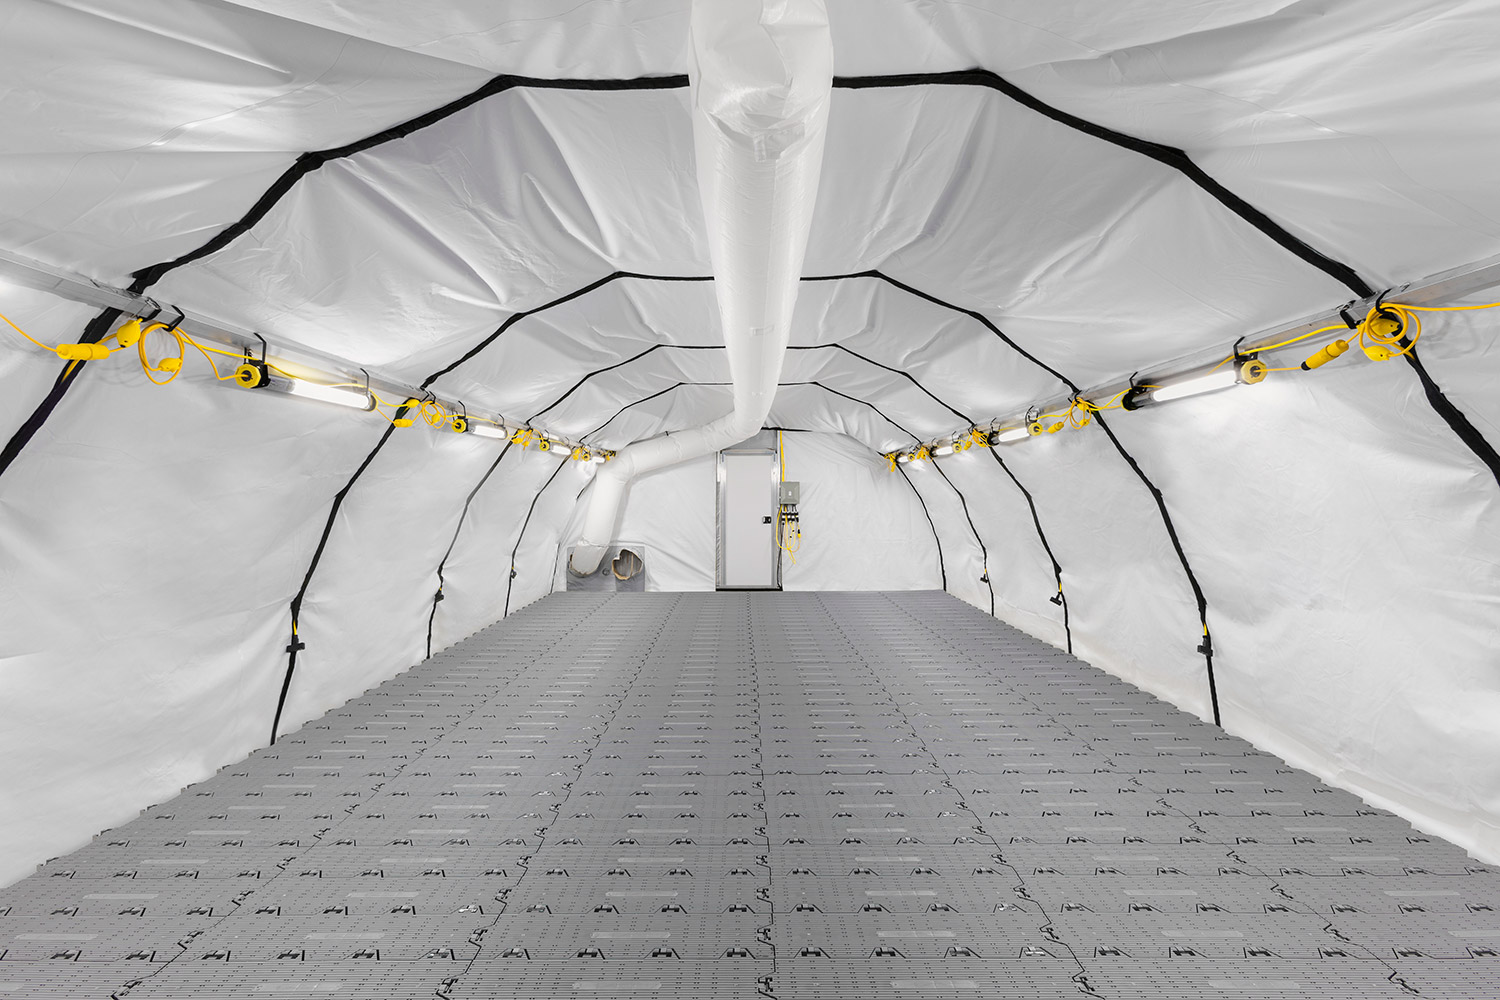 CAMSS 20Q UAV Military Shelter with Ruggedized Fluorescent Tube Lights